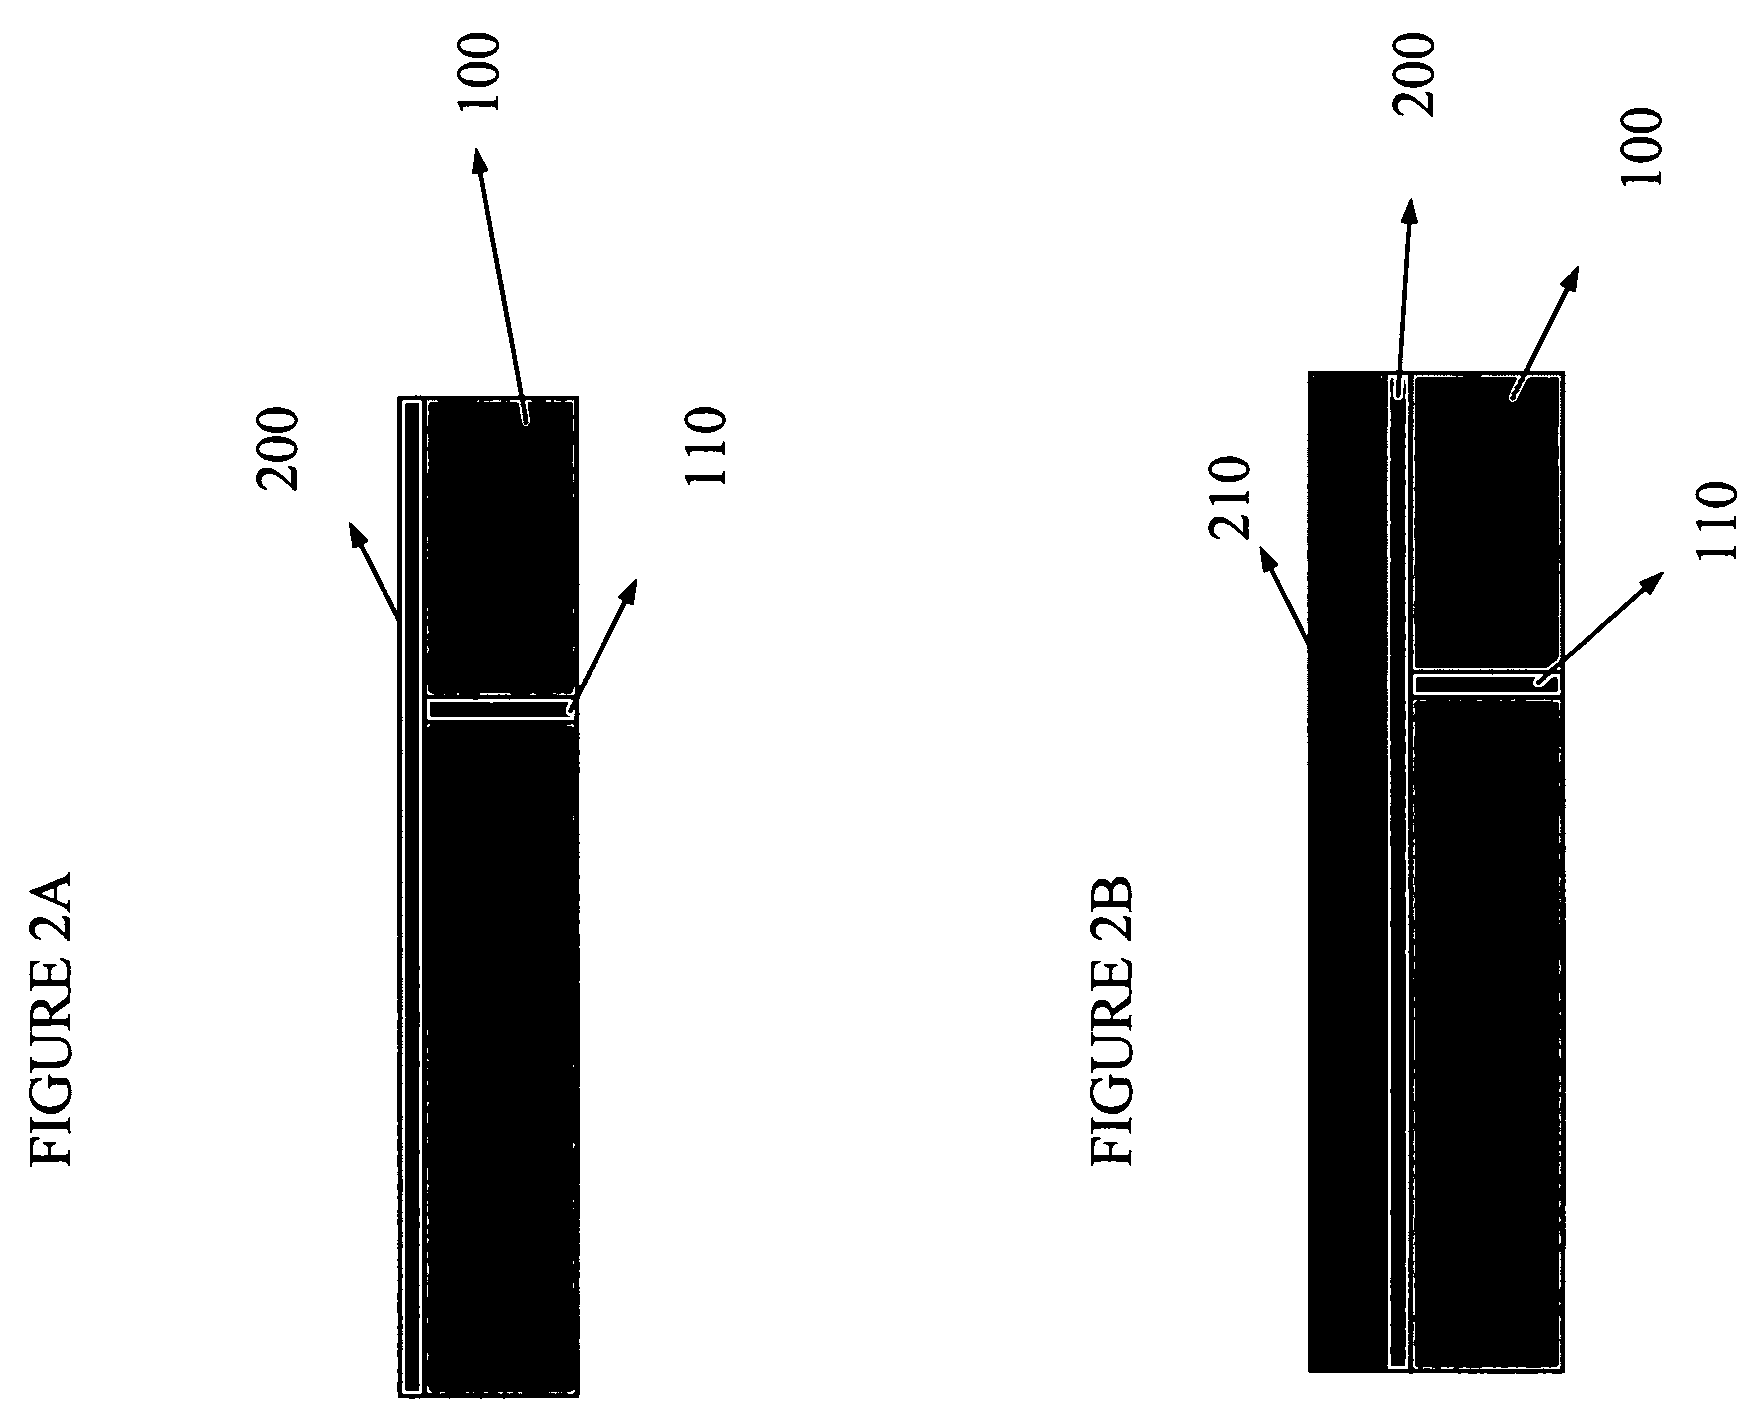 Process for forming microstructures